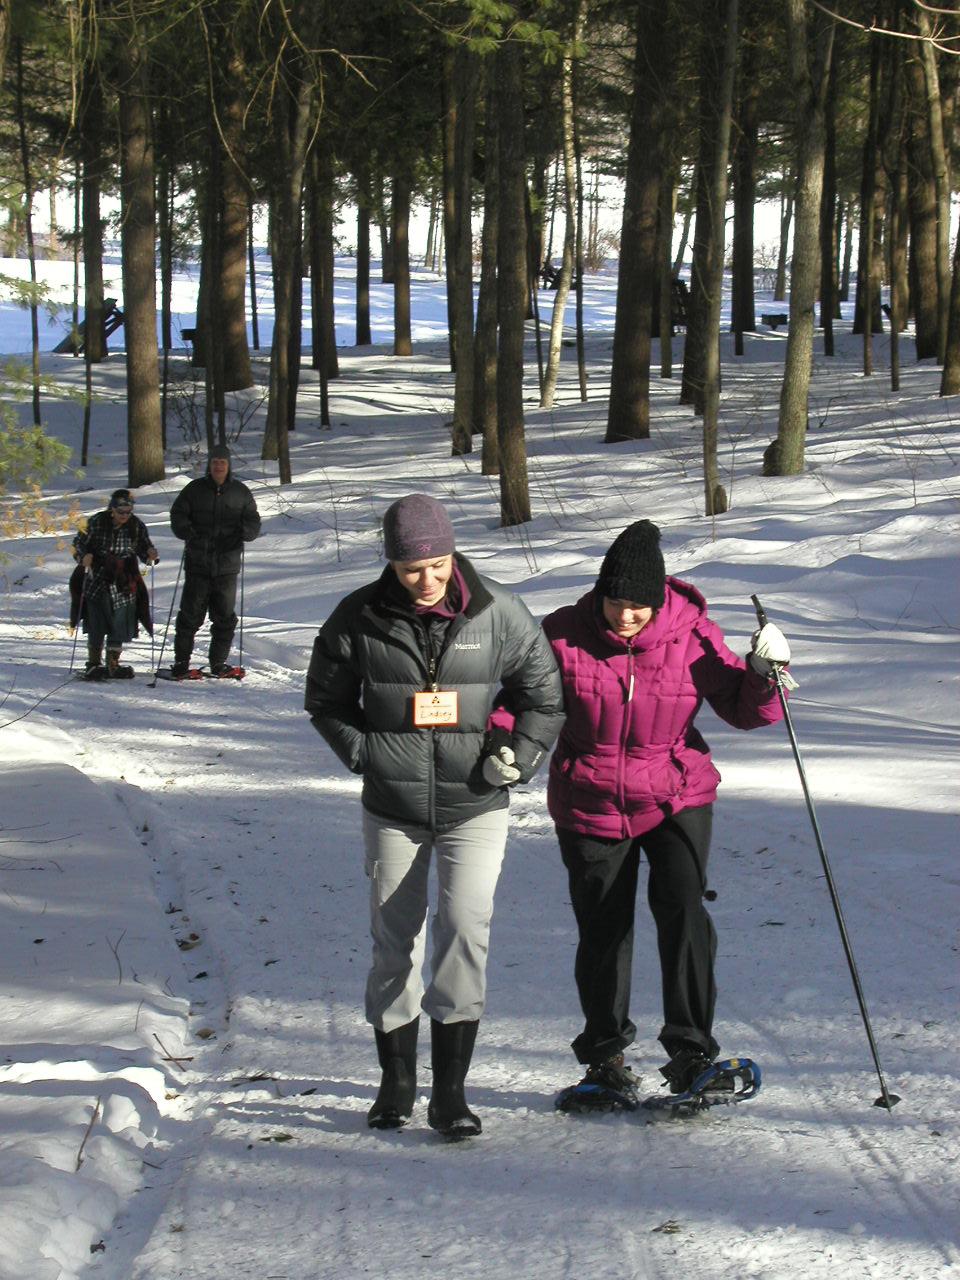 A snowshoer walking up a hill on a trail, using a ski pole whiled holding the hand of another person. Further down the hill, another pair of snowshoers are using ski poles.